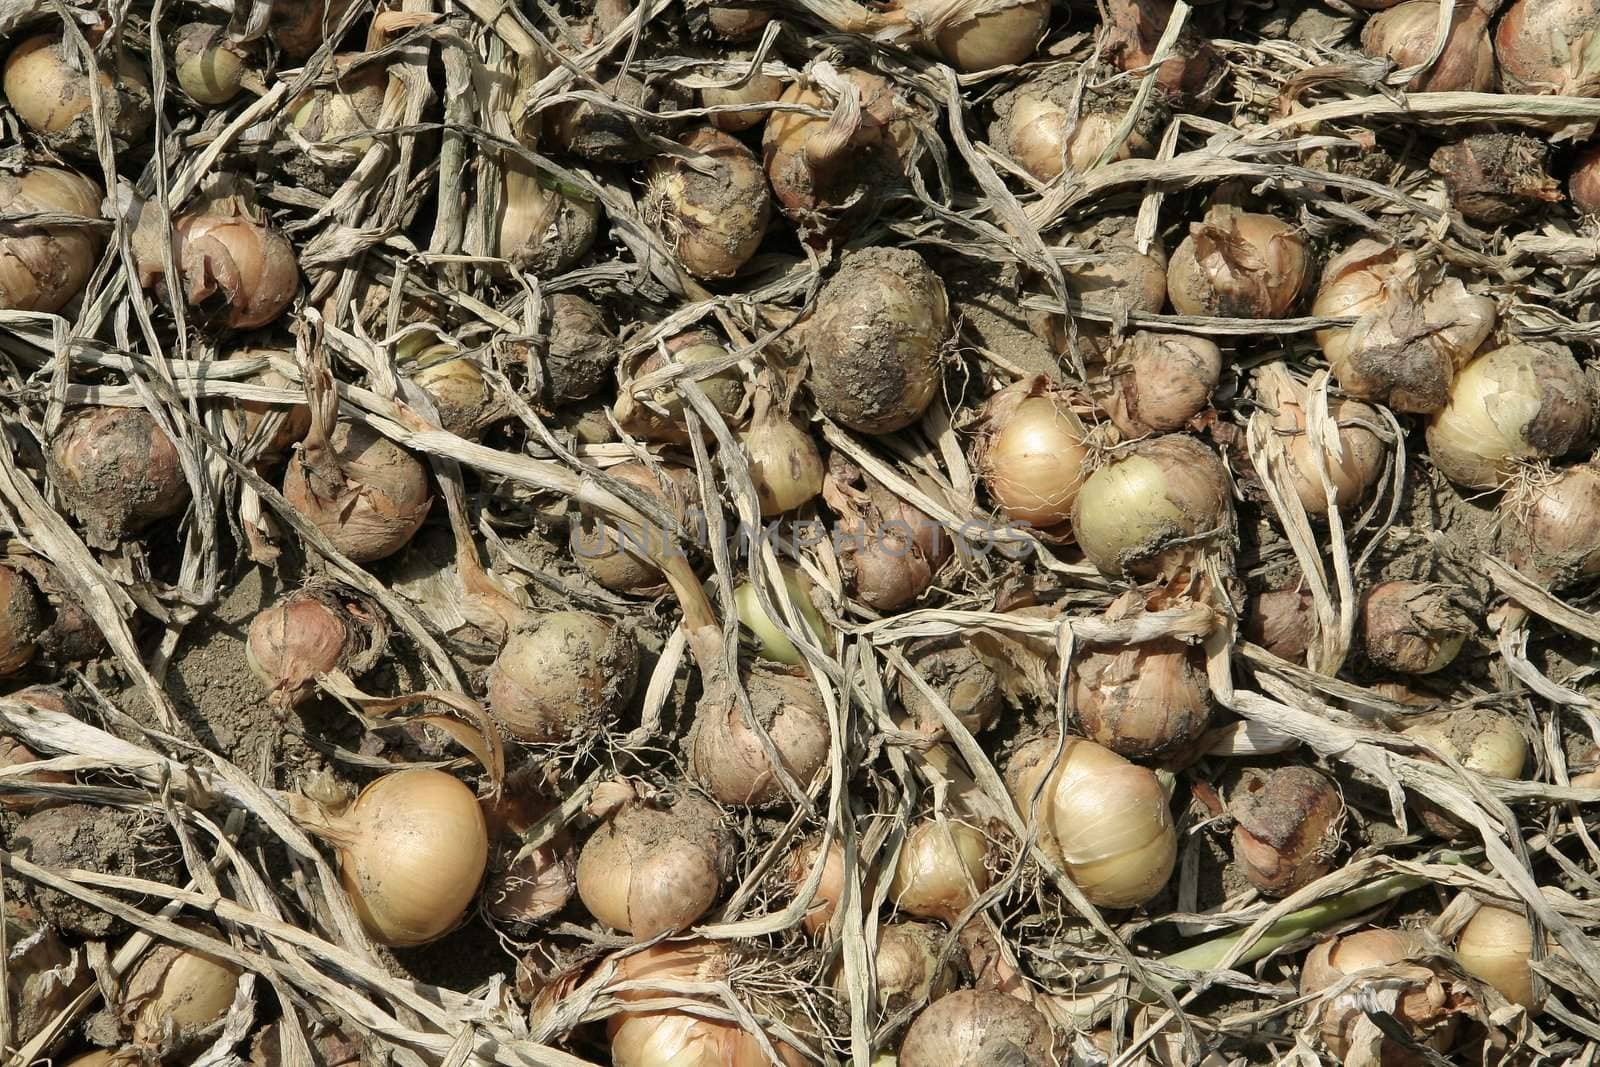 several onions drying on ground, dust and dirt